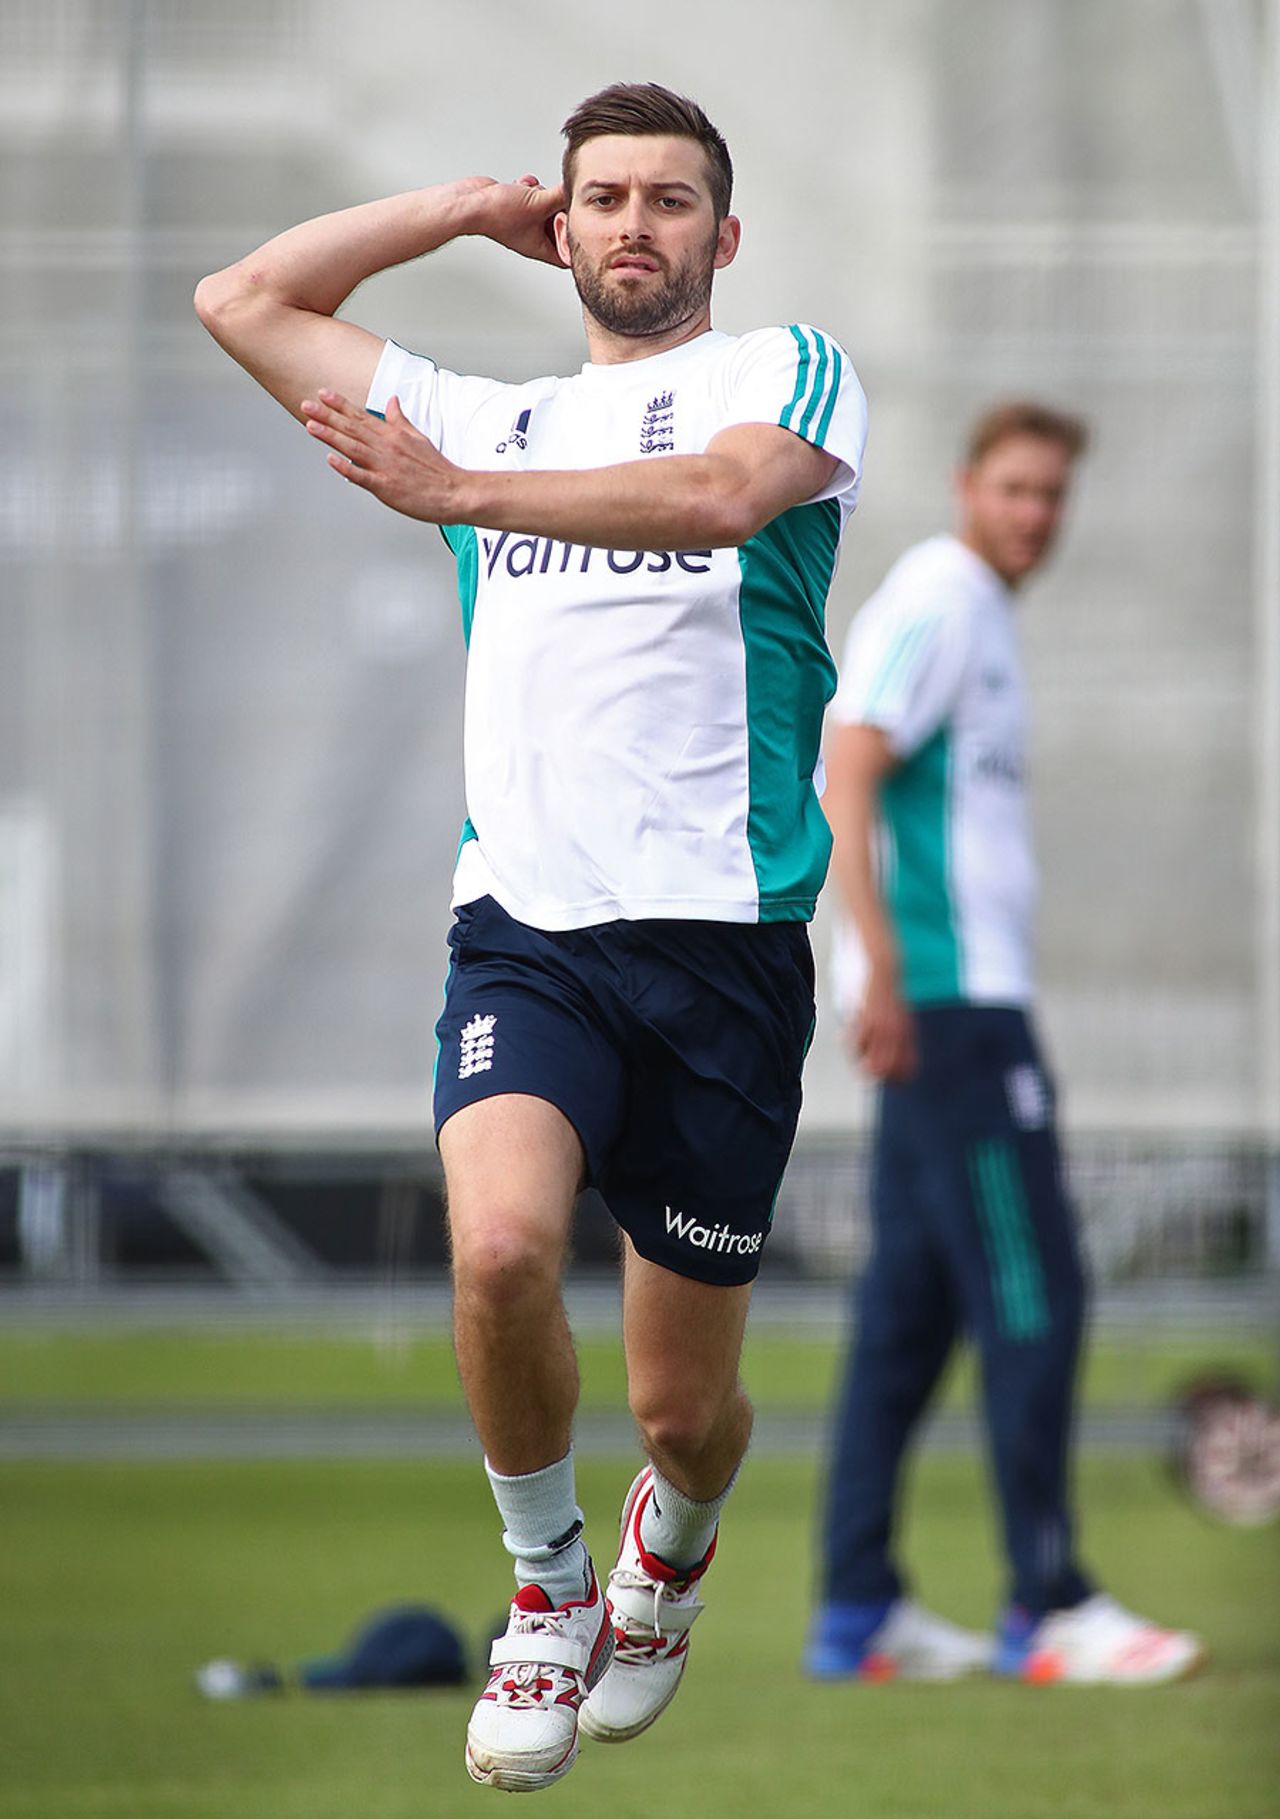 Mark Wood, recovering from ankle surgery, bowls in the nets ahead of the first Test, England v Pakistan, 1st Investec Test, Lord's, July 13, 2016